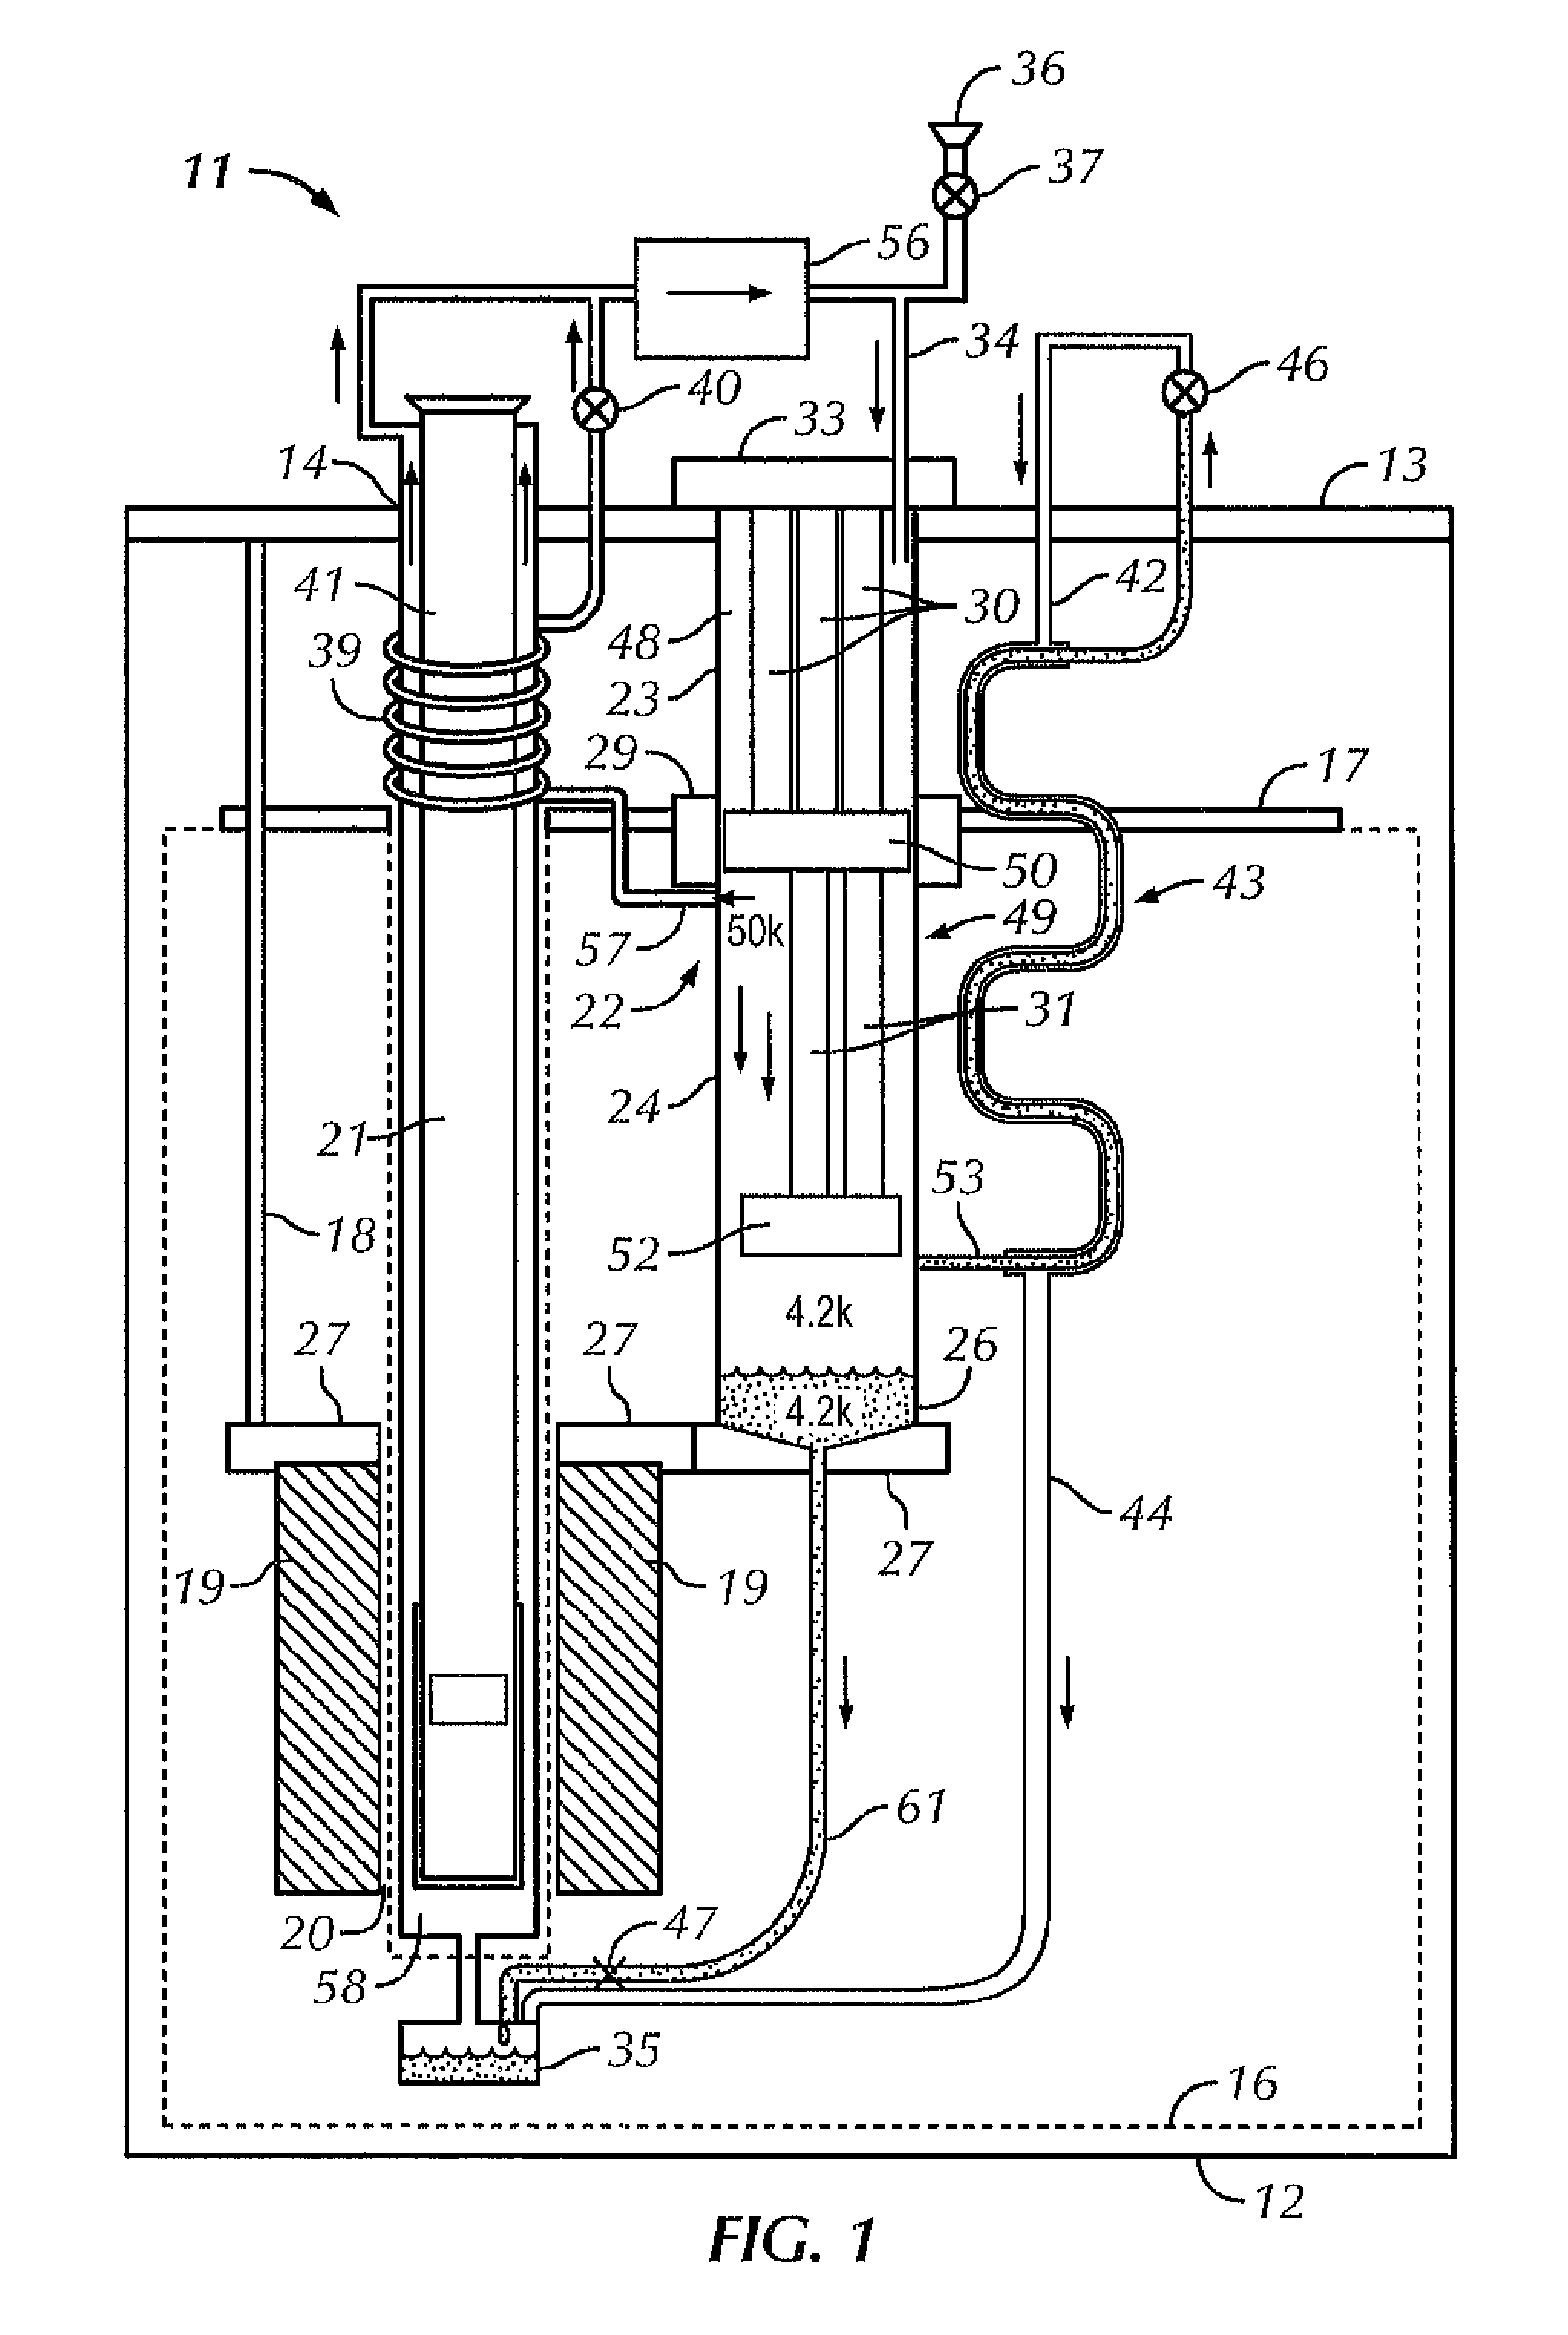 Method and apparatus for controlling temperature in a cryocooled cryostat  using static and moving gas